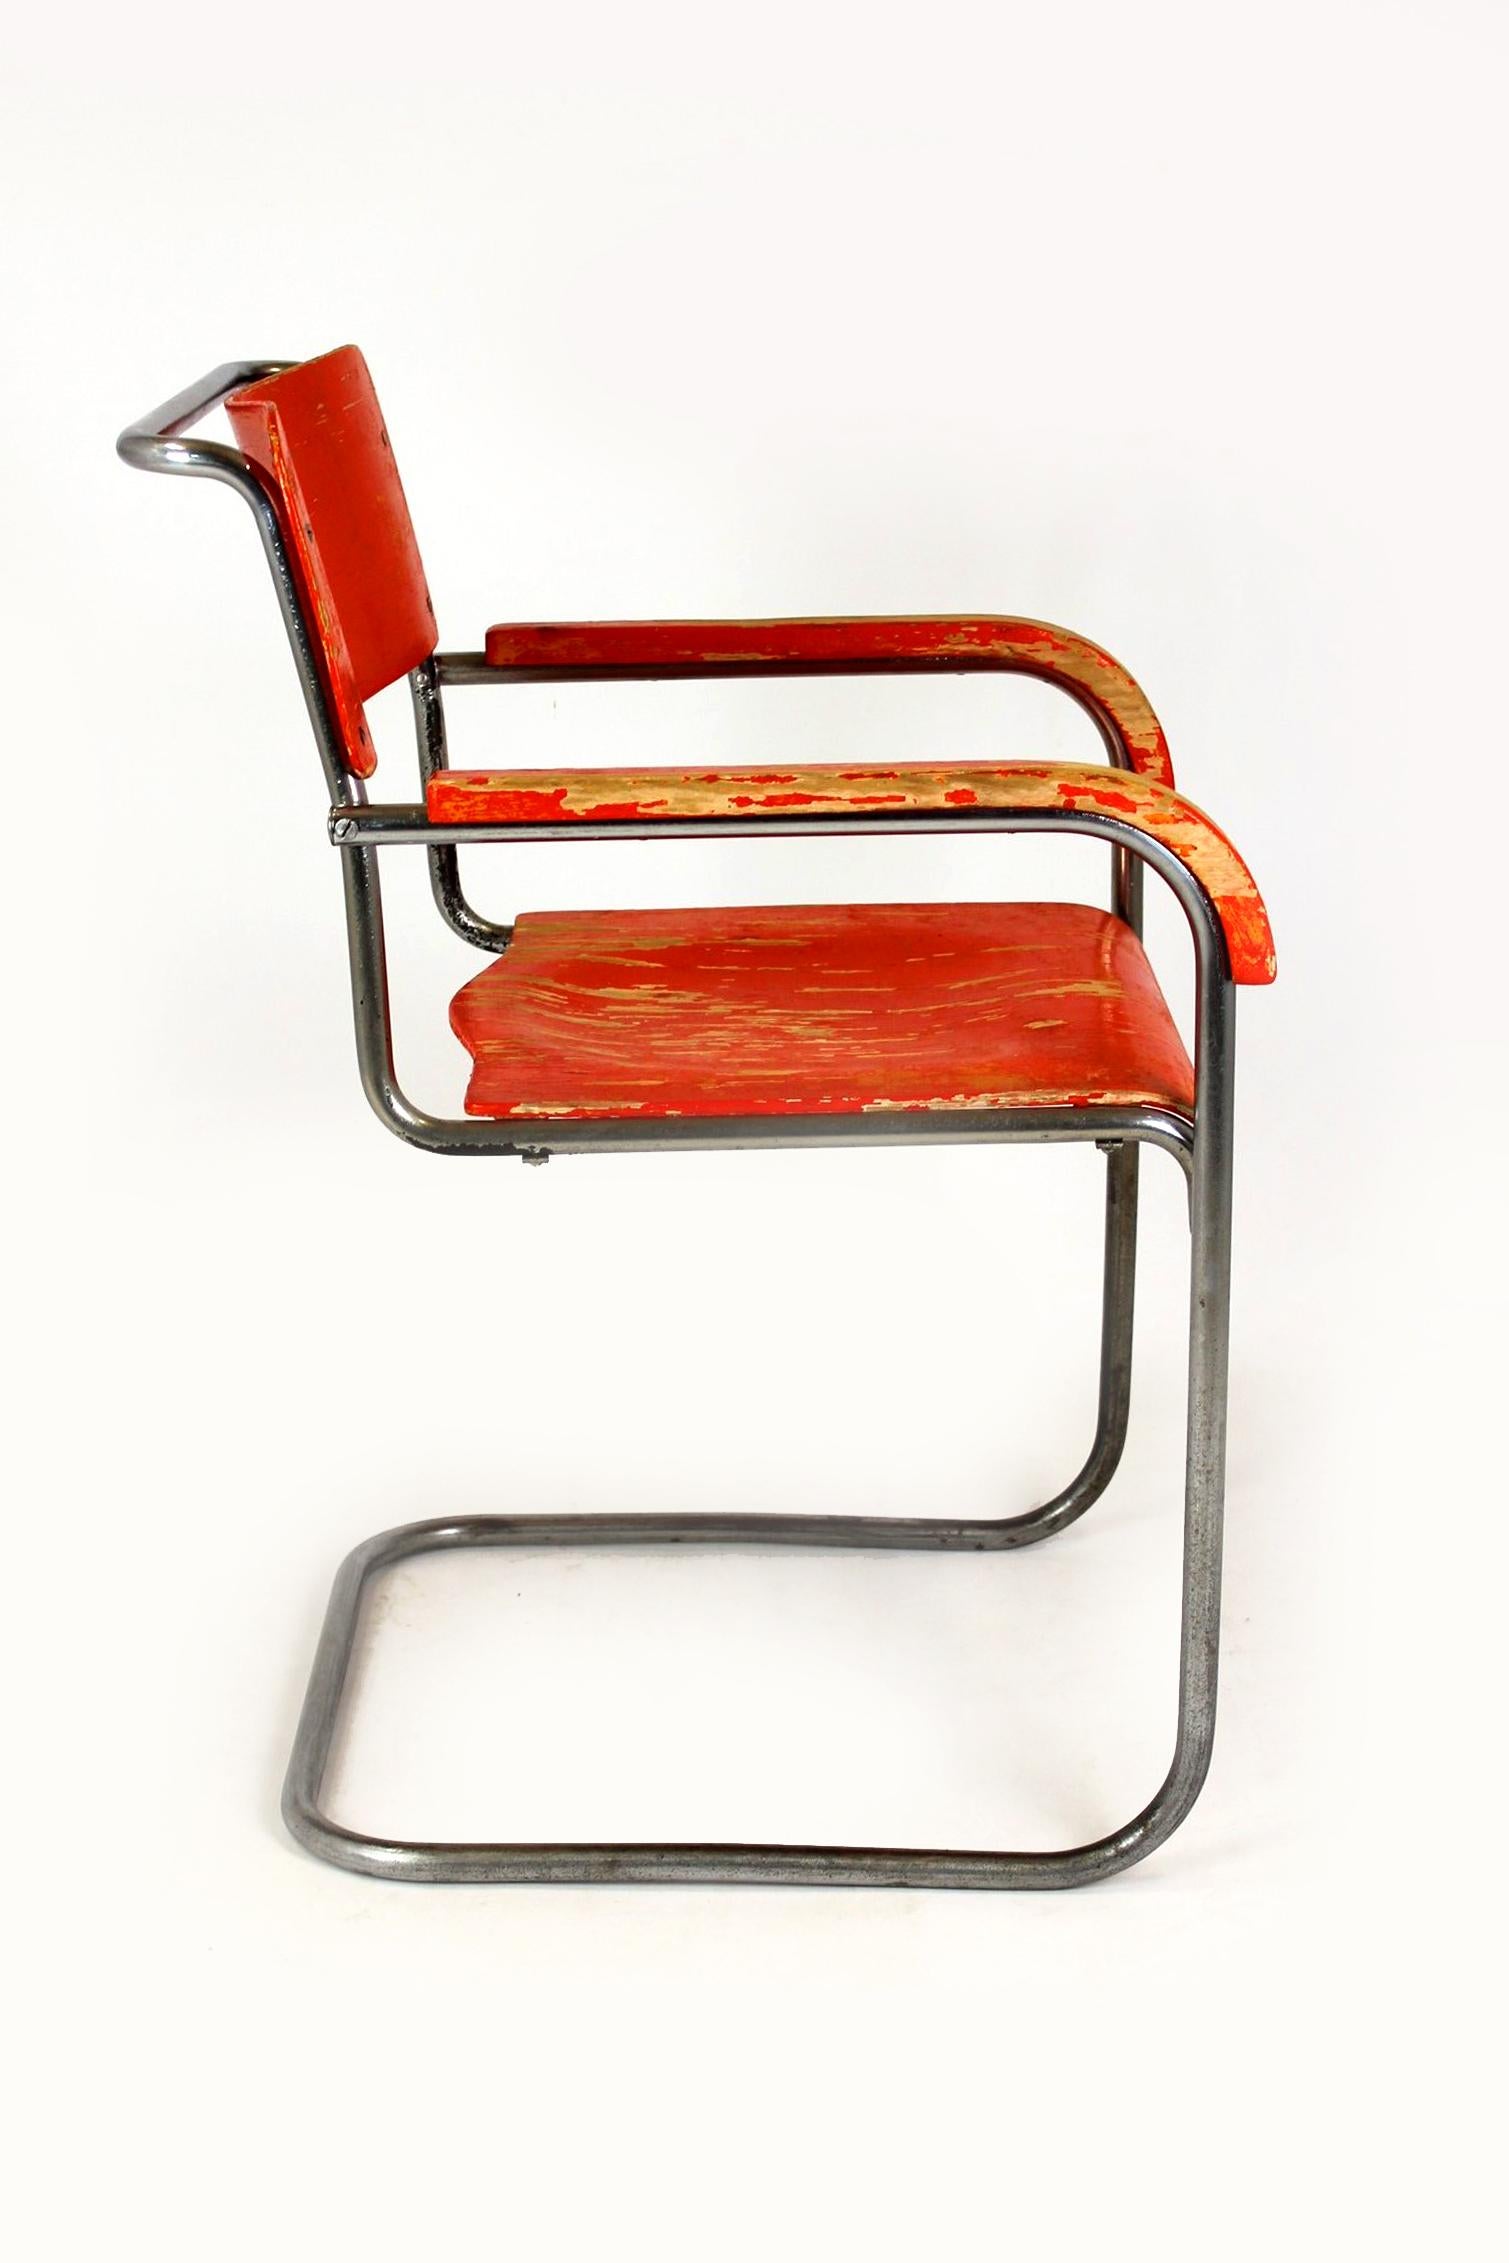 Bauhaus B34 Cantilever Chair in Plywood & Chrome by Marcel Breuer, 1930s For Sale 6